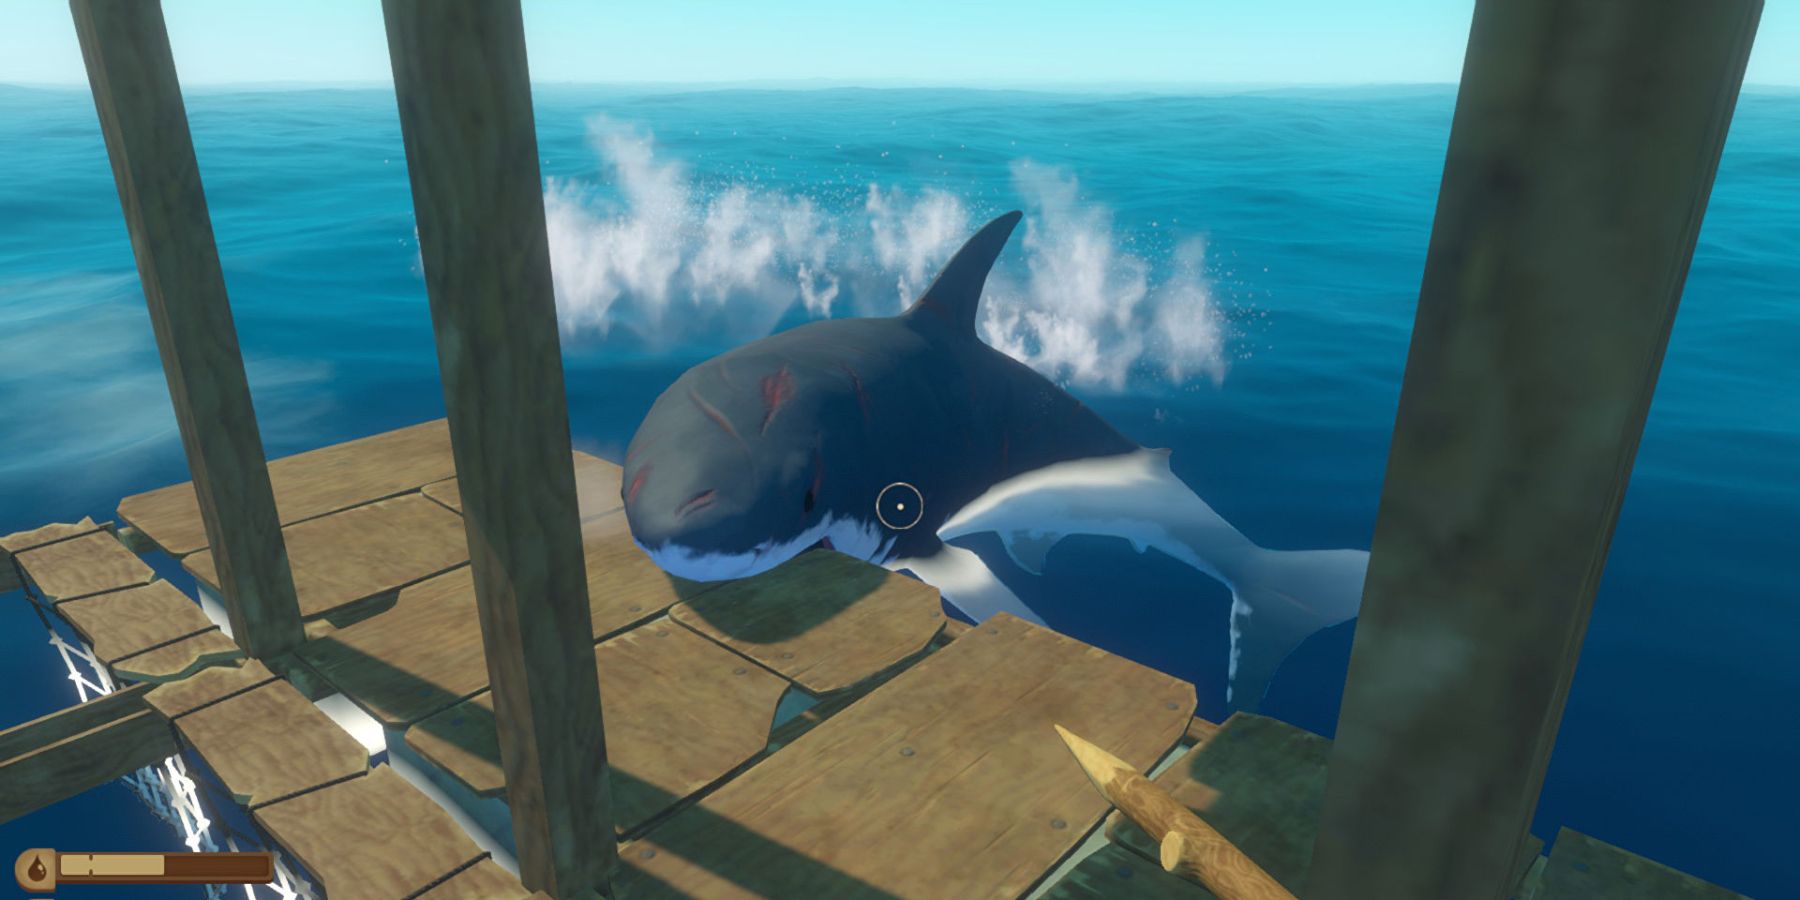 The player's raft getting attacked by a shark in Raft video game.